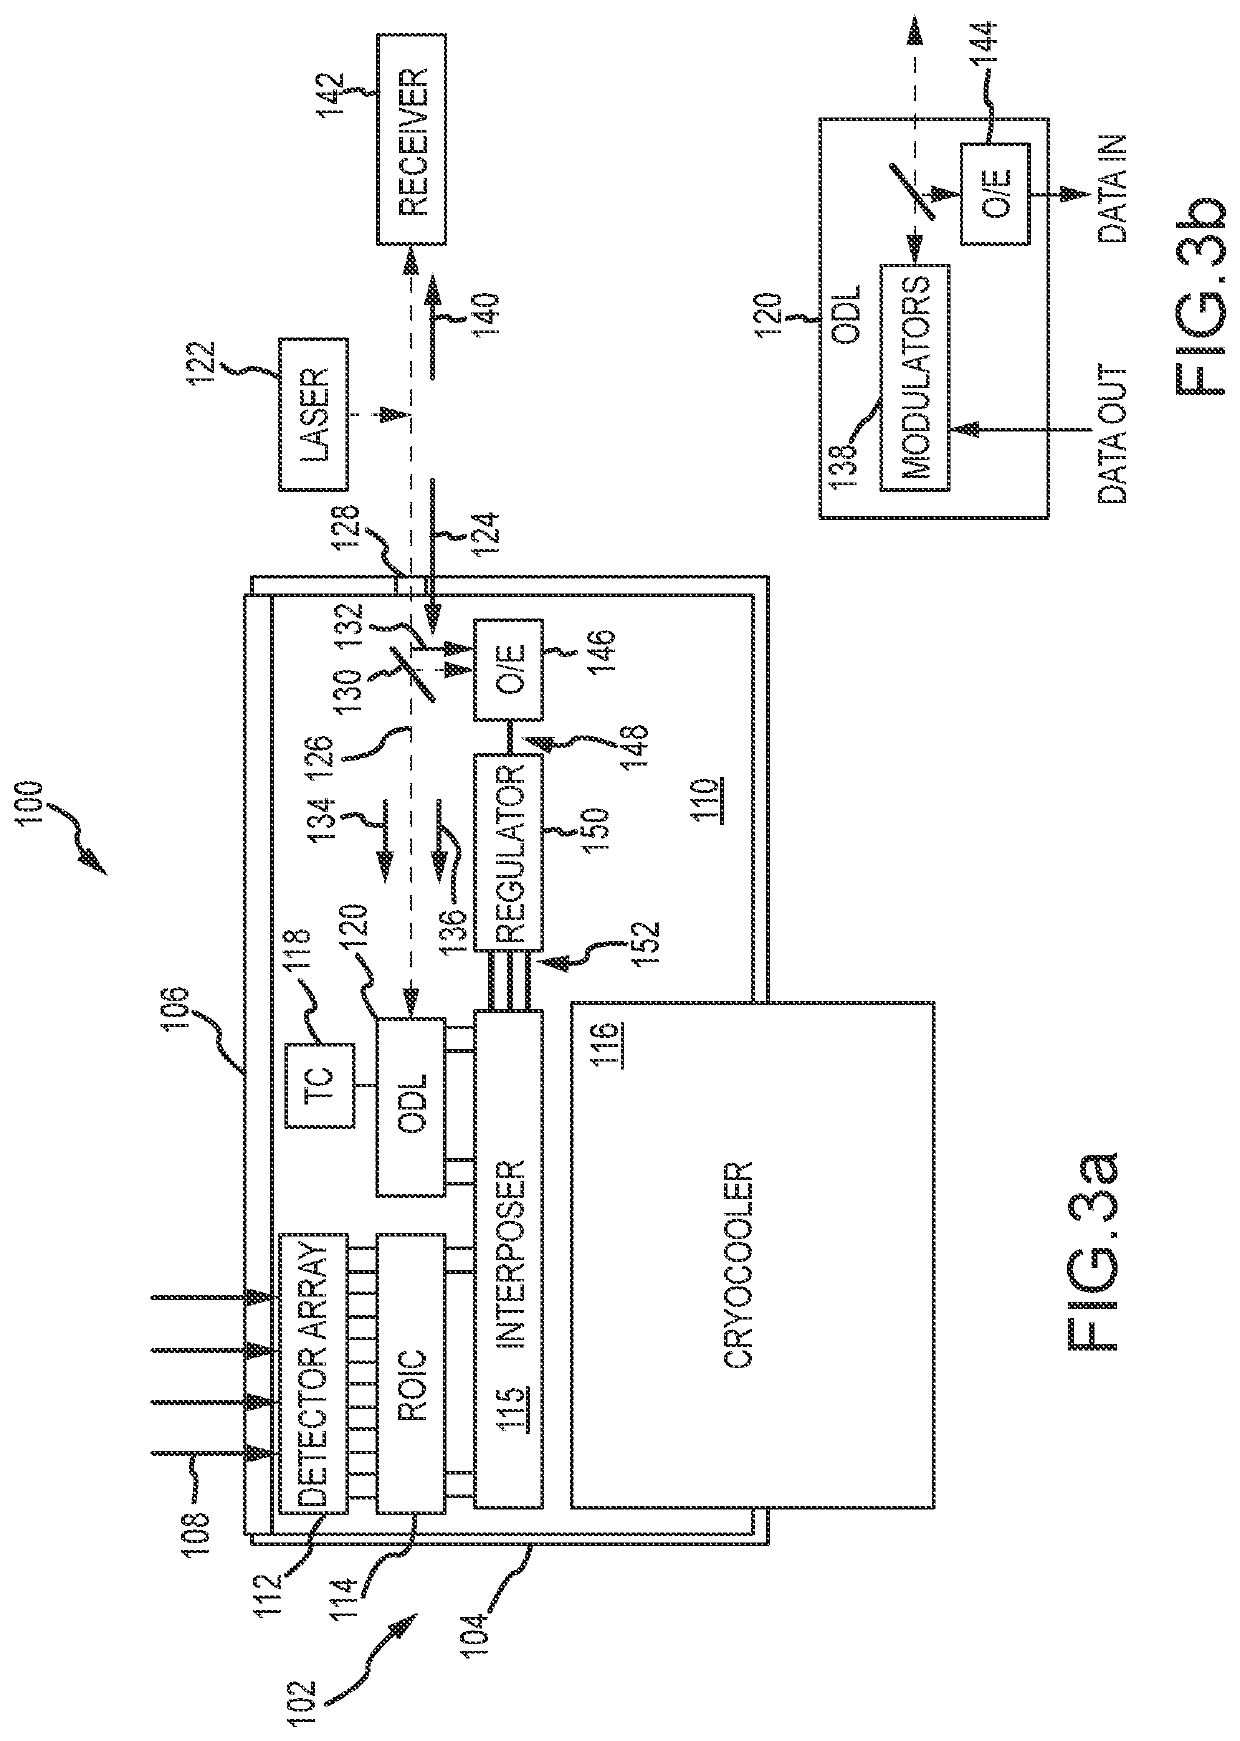 Optically powered cryogenic focal plane array (FPA) with an optical data link